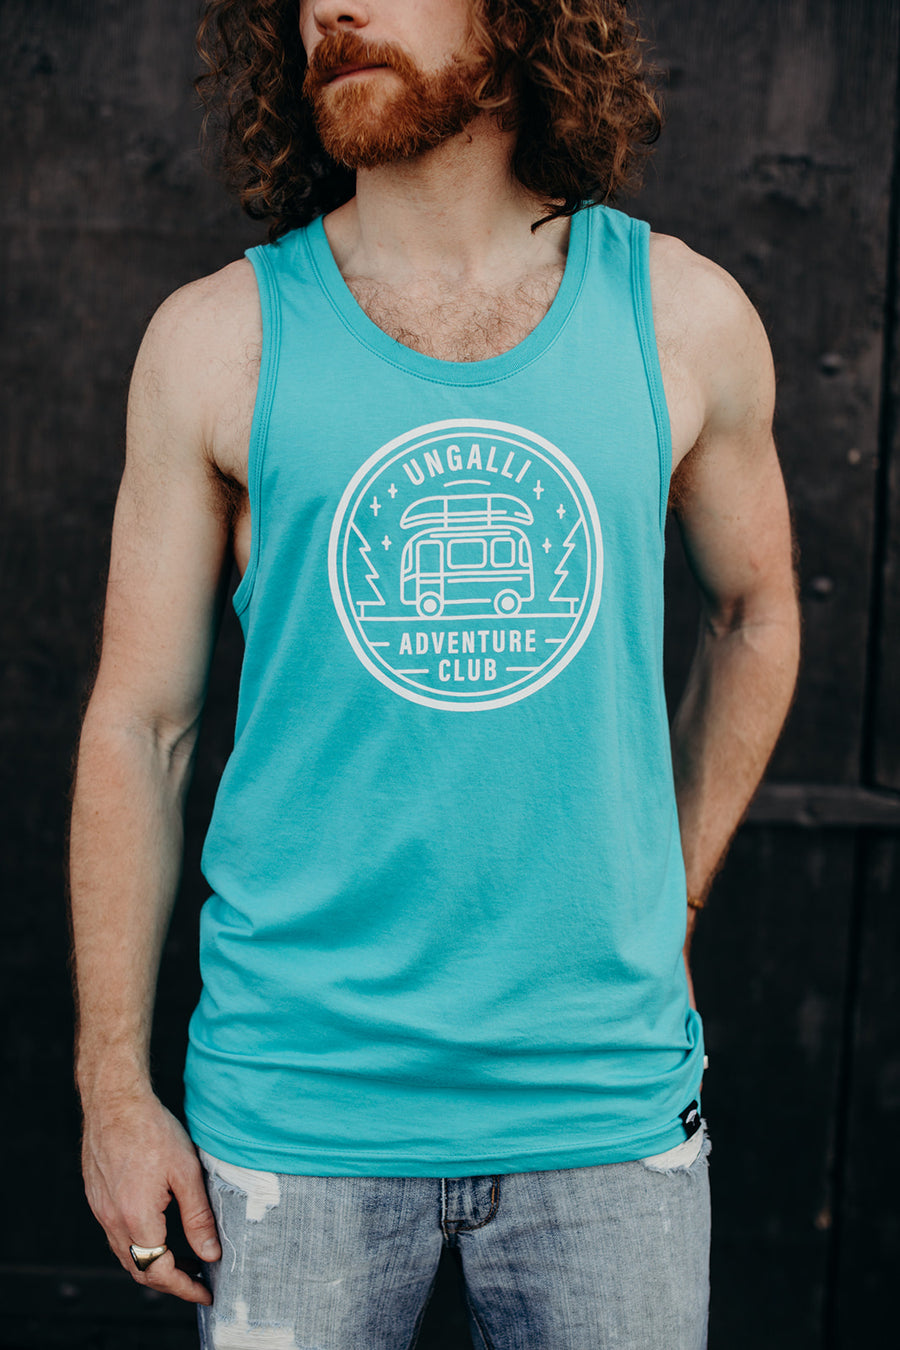 Men's organic teal tank top with white details